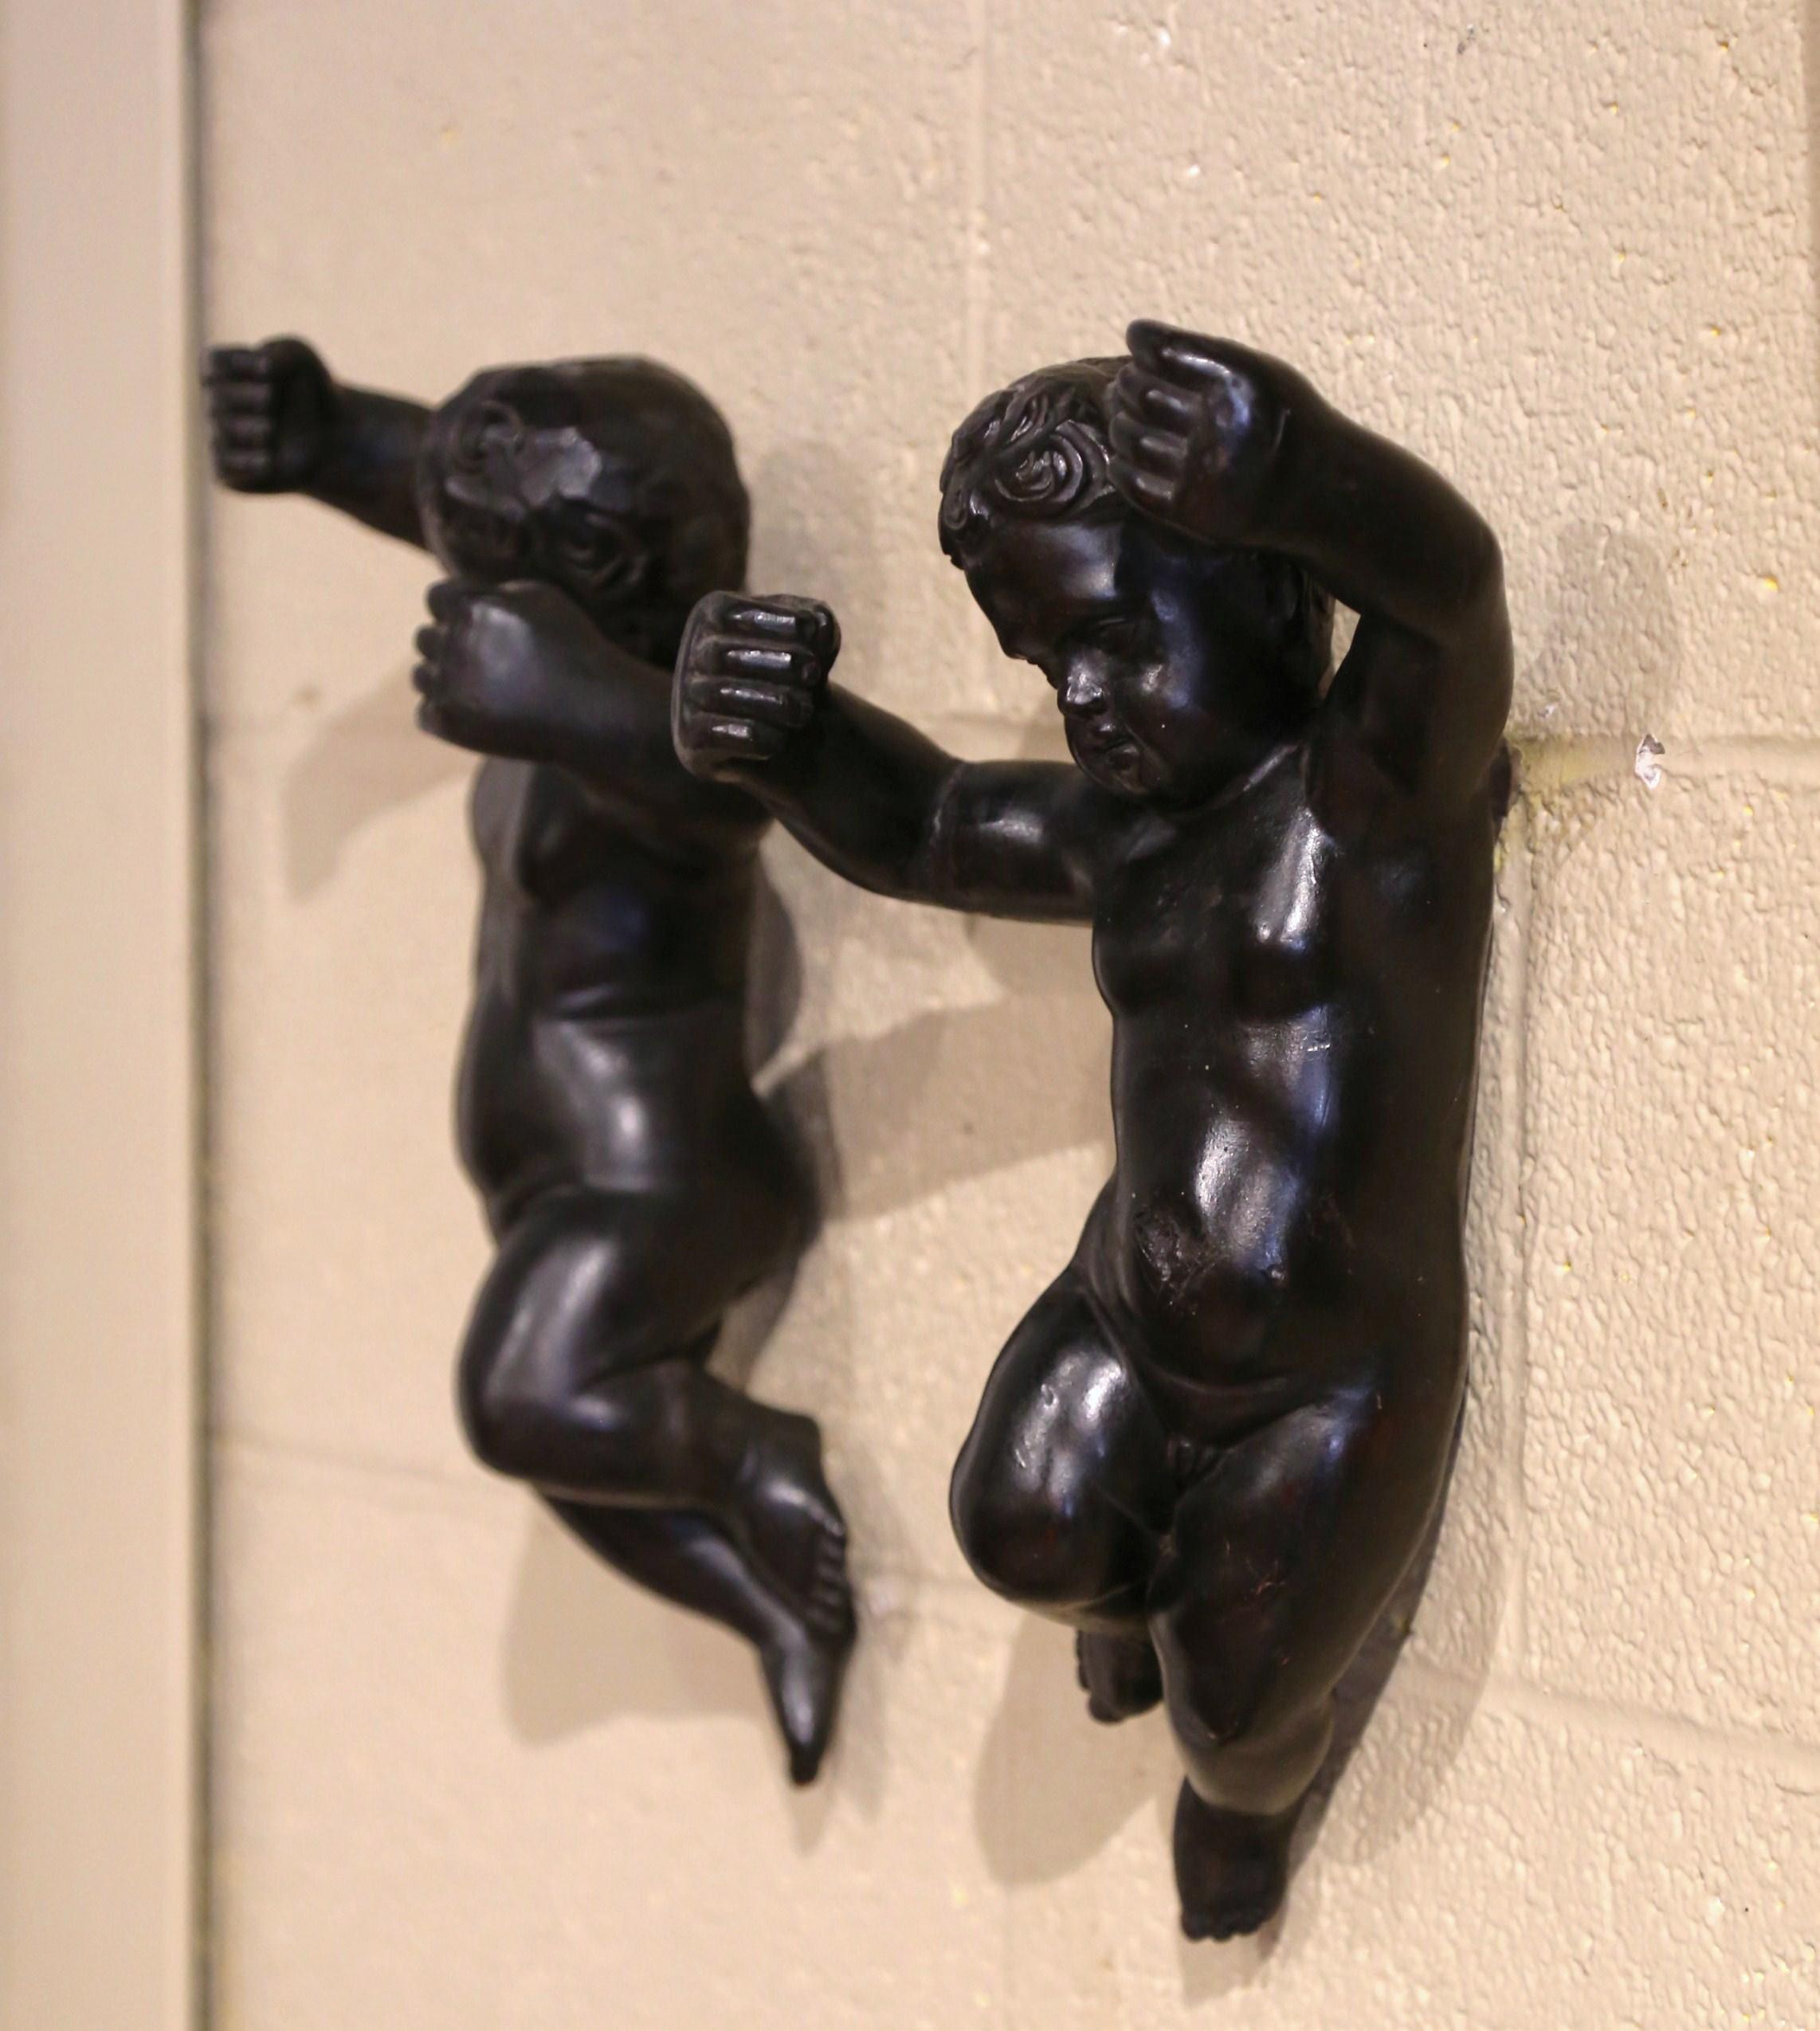 These elegant antique putti sculptures were crafted in Italy circa 1860; each cherub wall hanging sculpture feature a hand carved cherub in the nude with short curly hair. Hand painted in black, the cherub's arms are raised in exultation. It appears